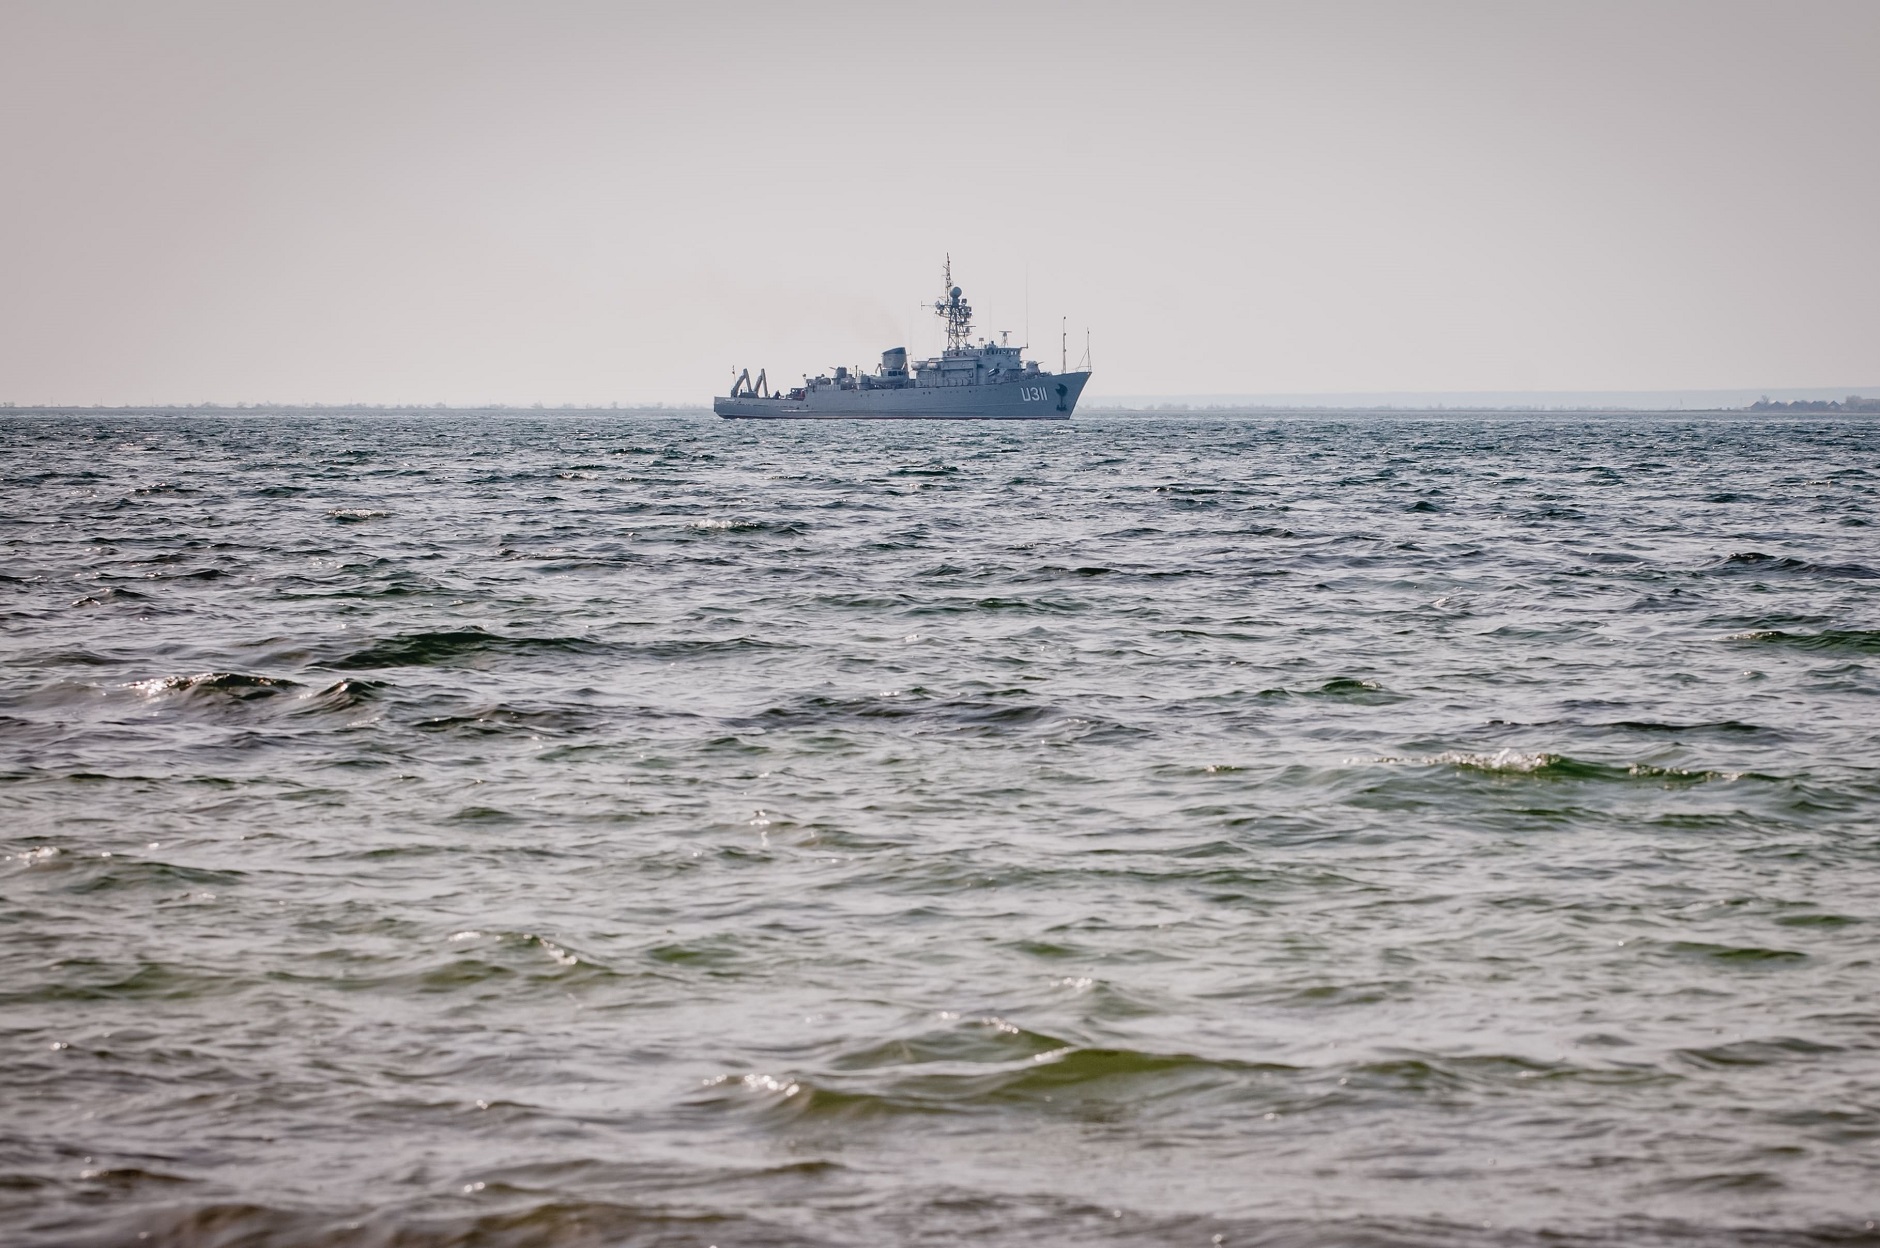 Crimea crisis 2014, Minesweeper U311 Cherkasy of Ukrainian Naval Forces on Donuzlav Lake few hours before it was taken by Russian troops